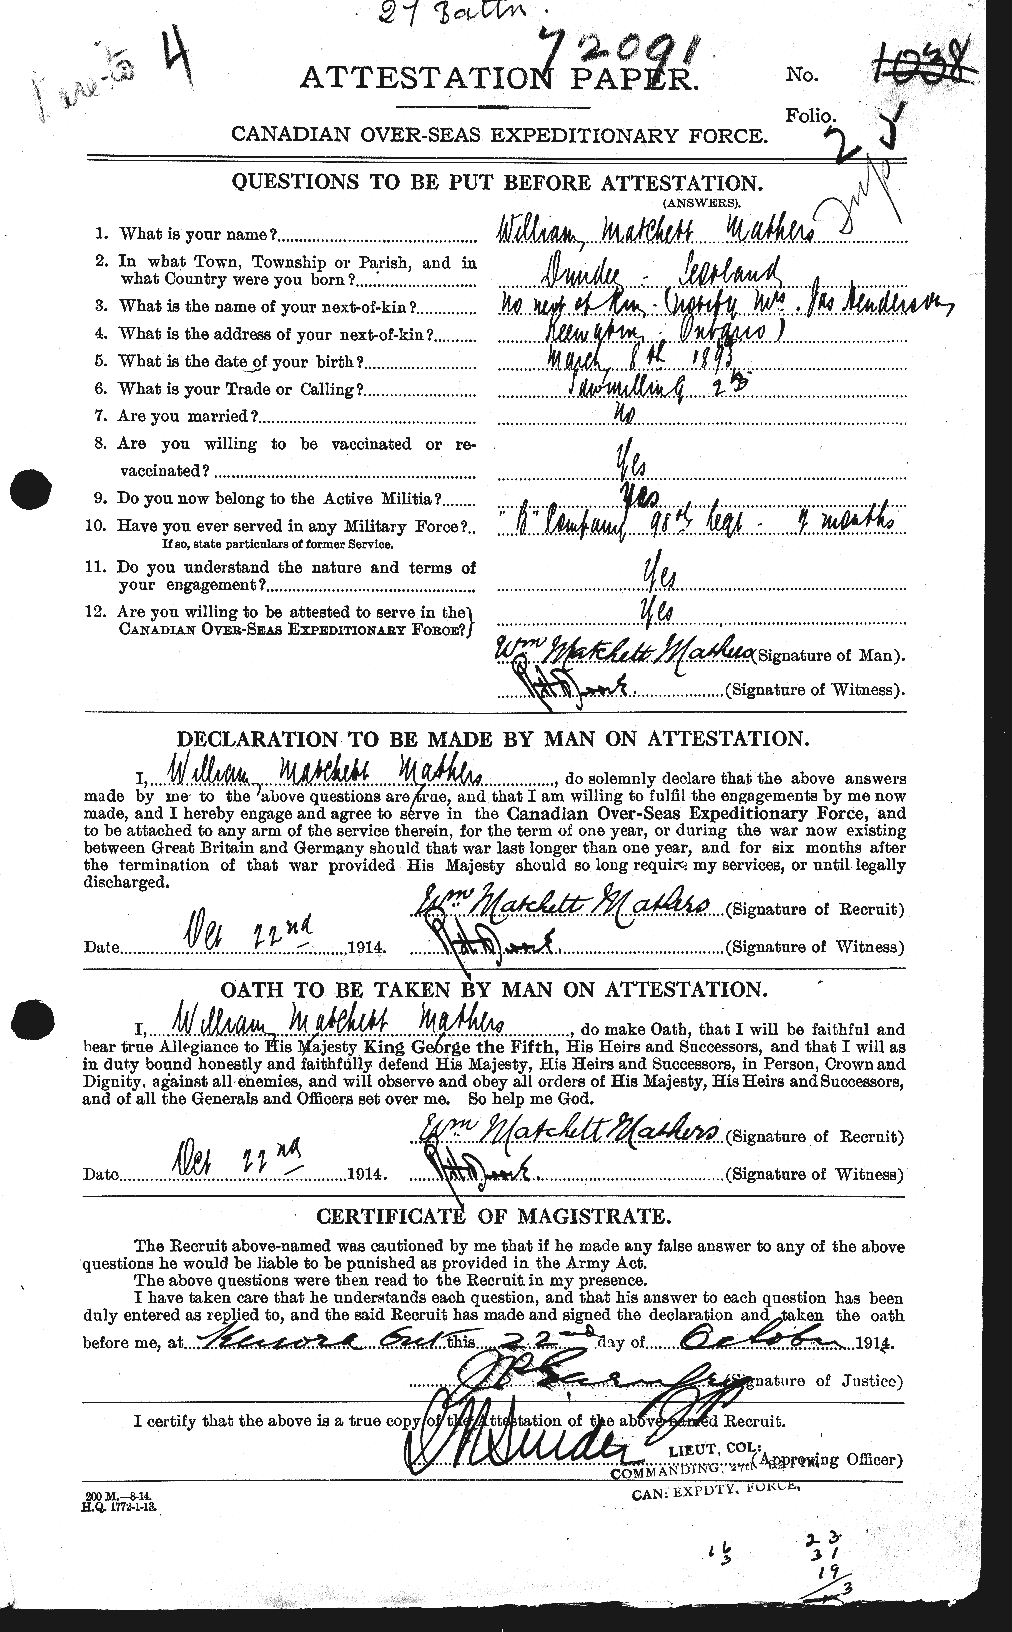 Personnel Records of the First World War - CEF 483467a